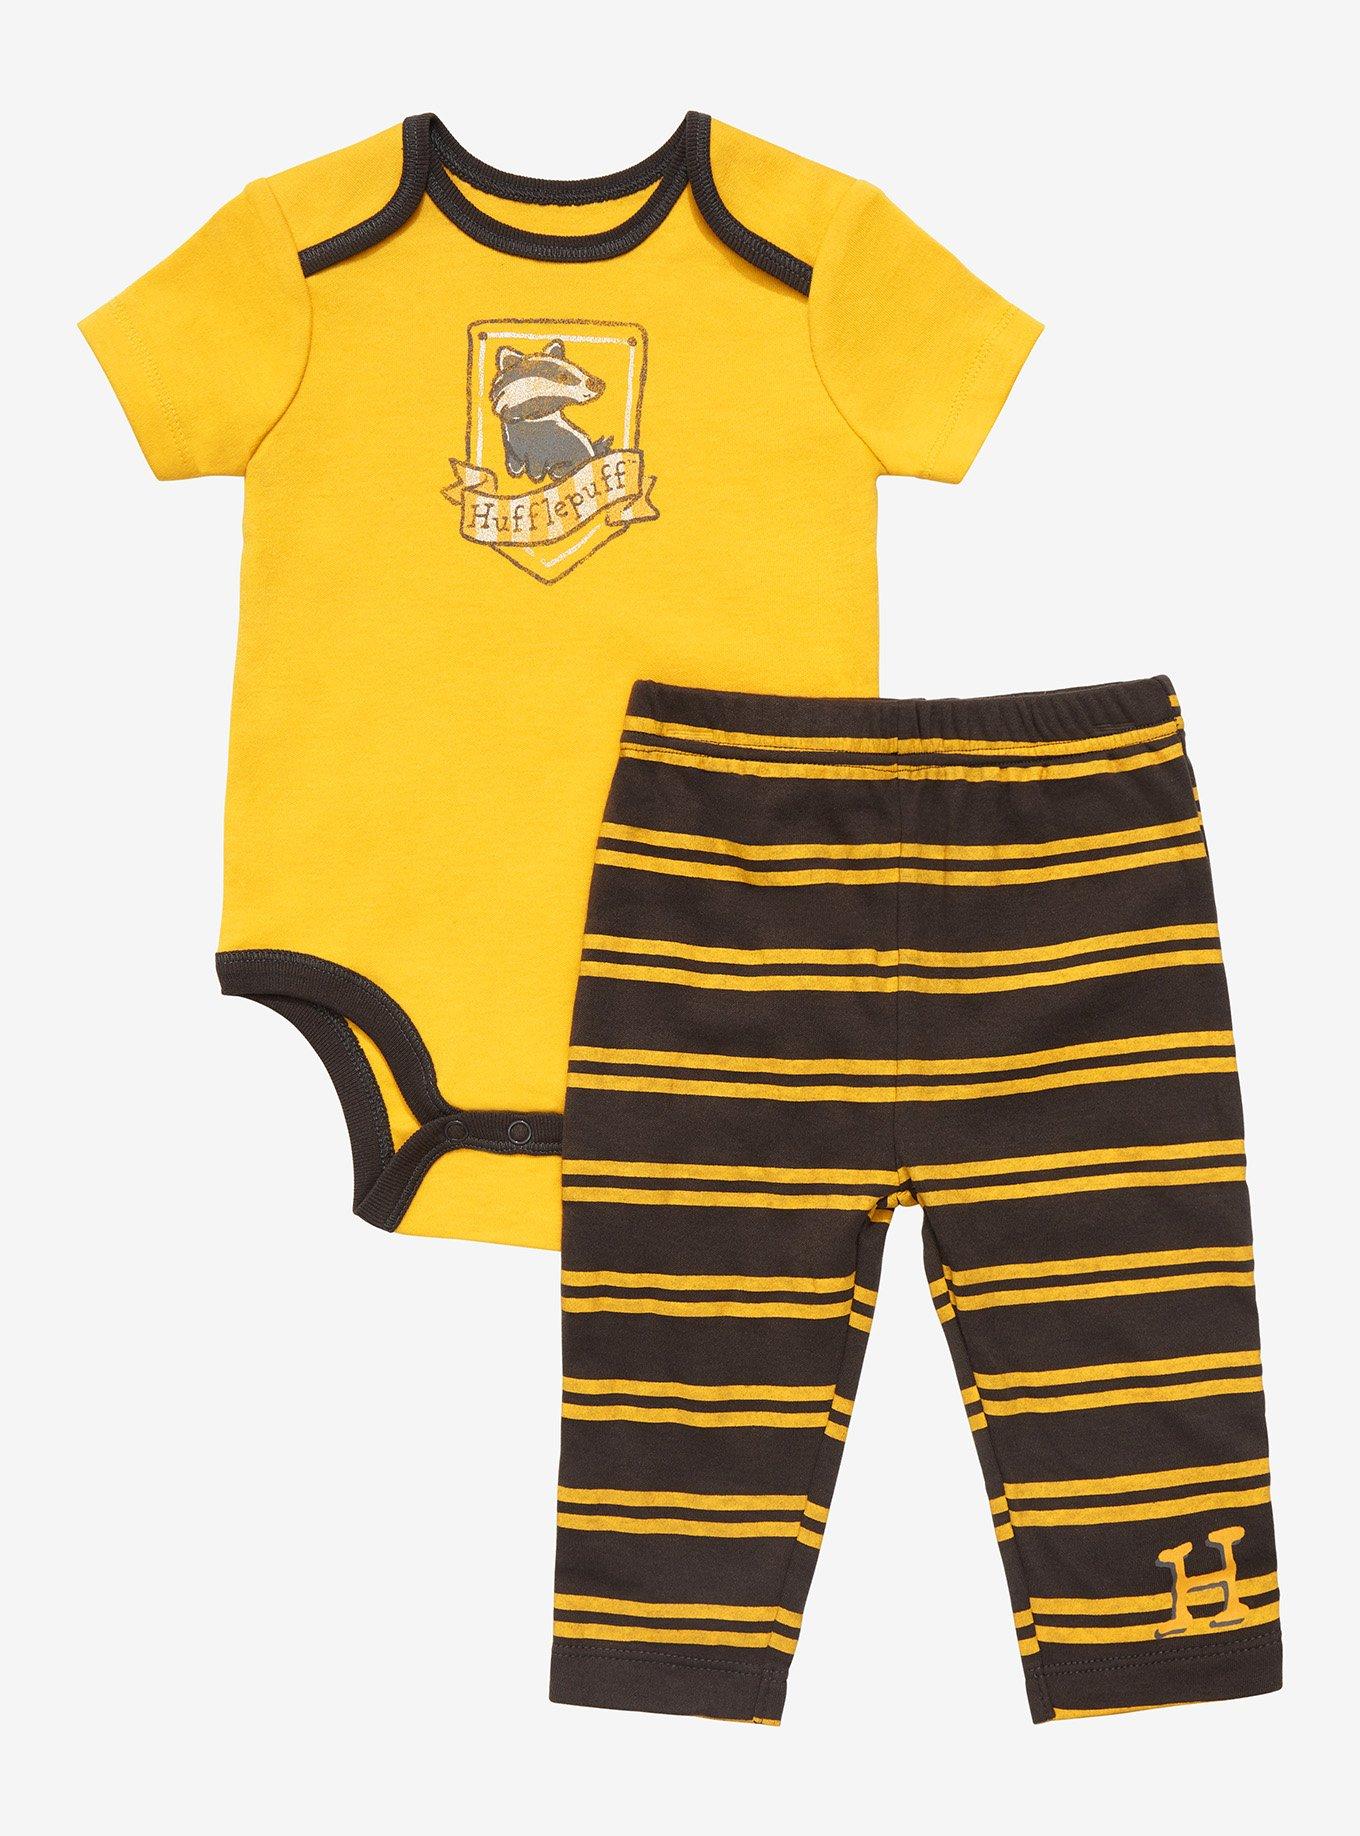 Harry Potter Hufflepuff Crest Infant Leggings Exclusive Set - | BoxLunch and One-Piece BoxLunch